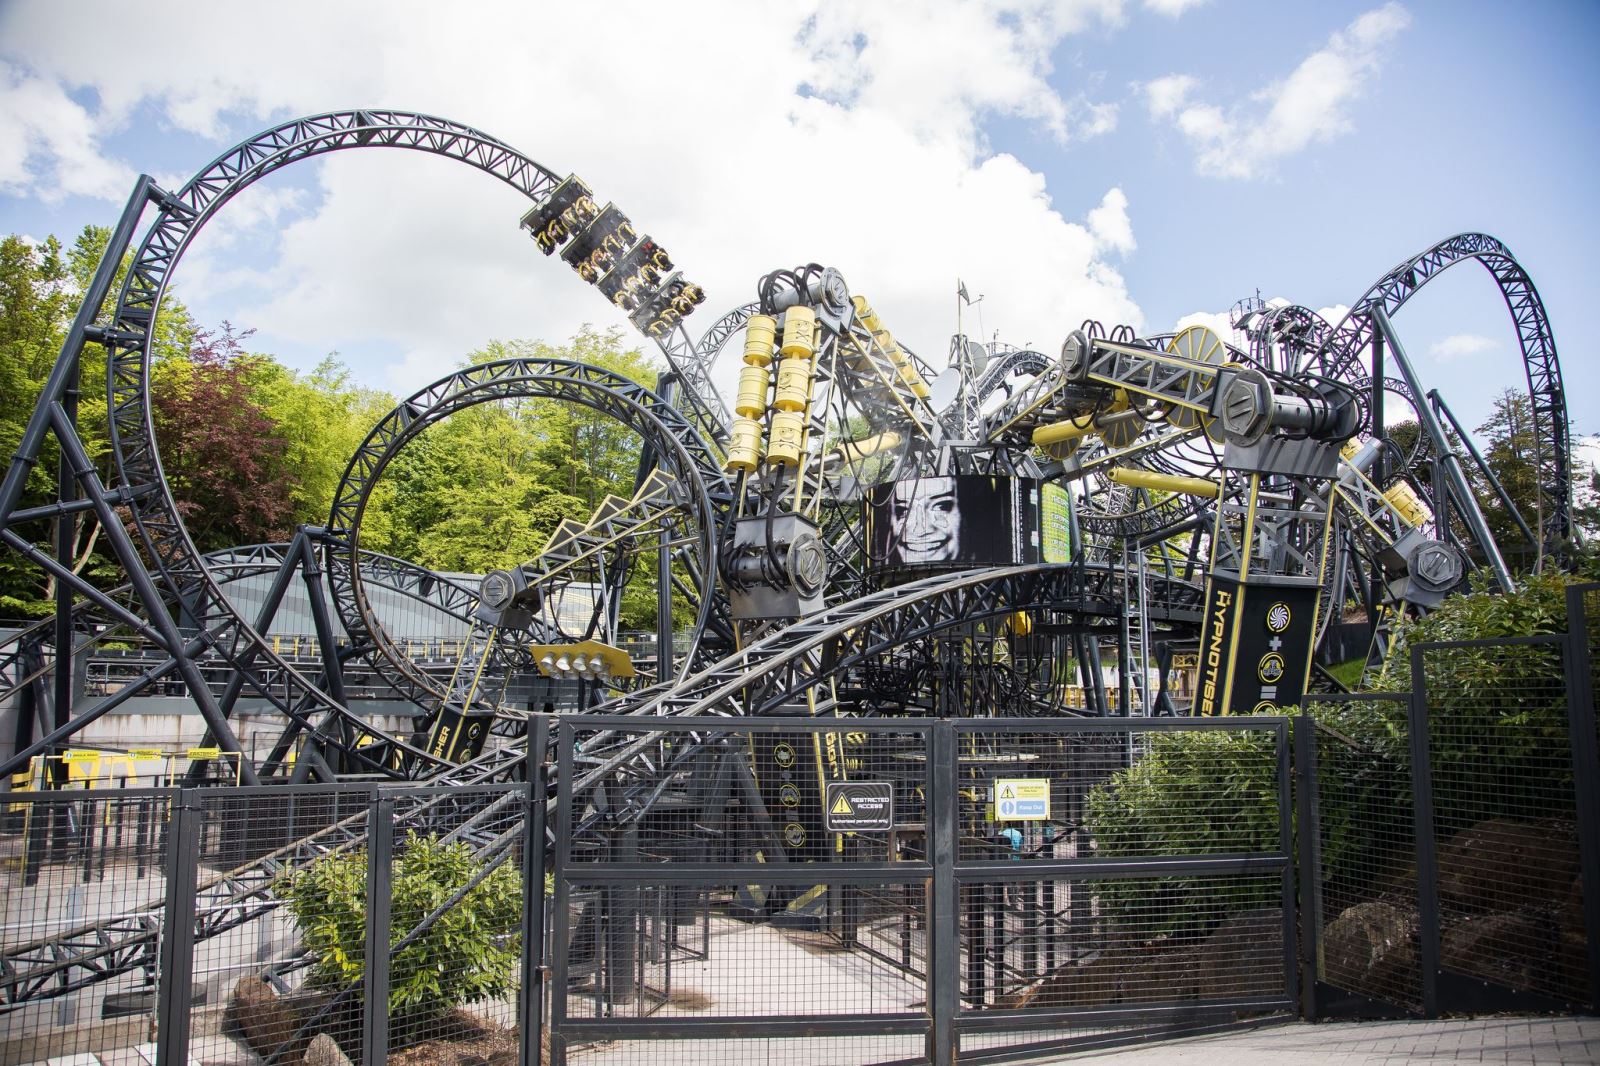 Alton Towers Resort prepares for ultimate celebration of its world